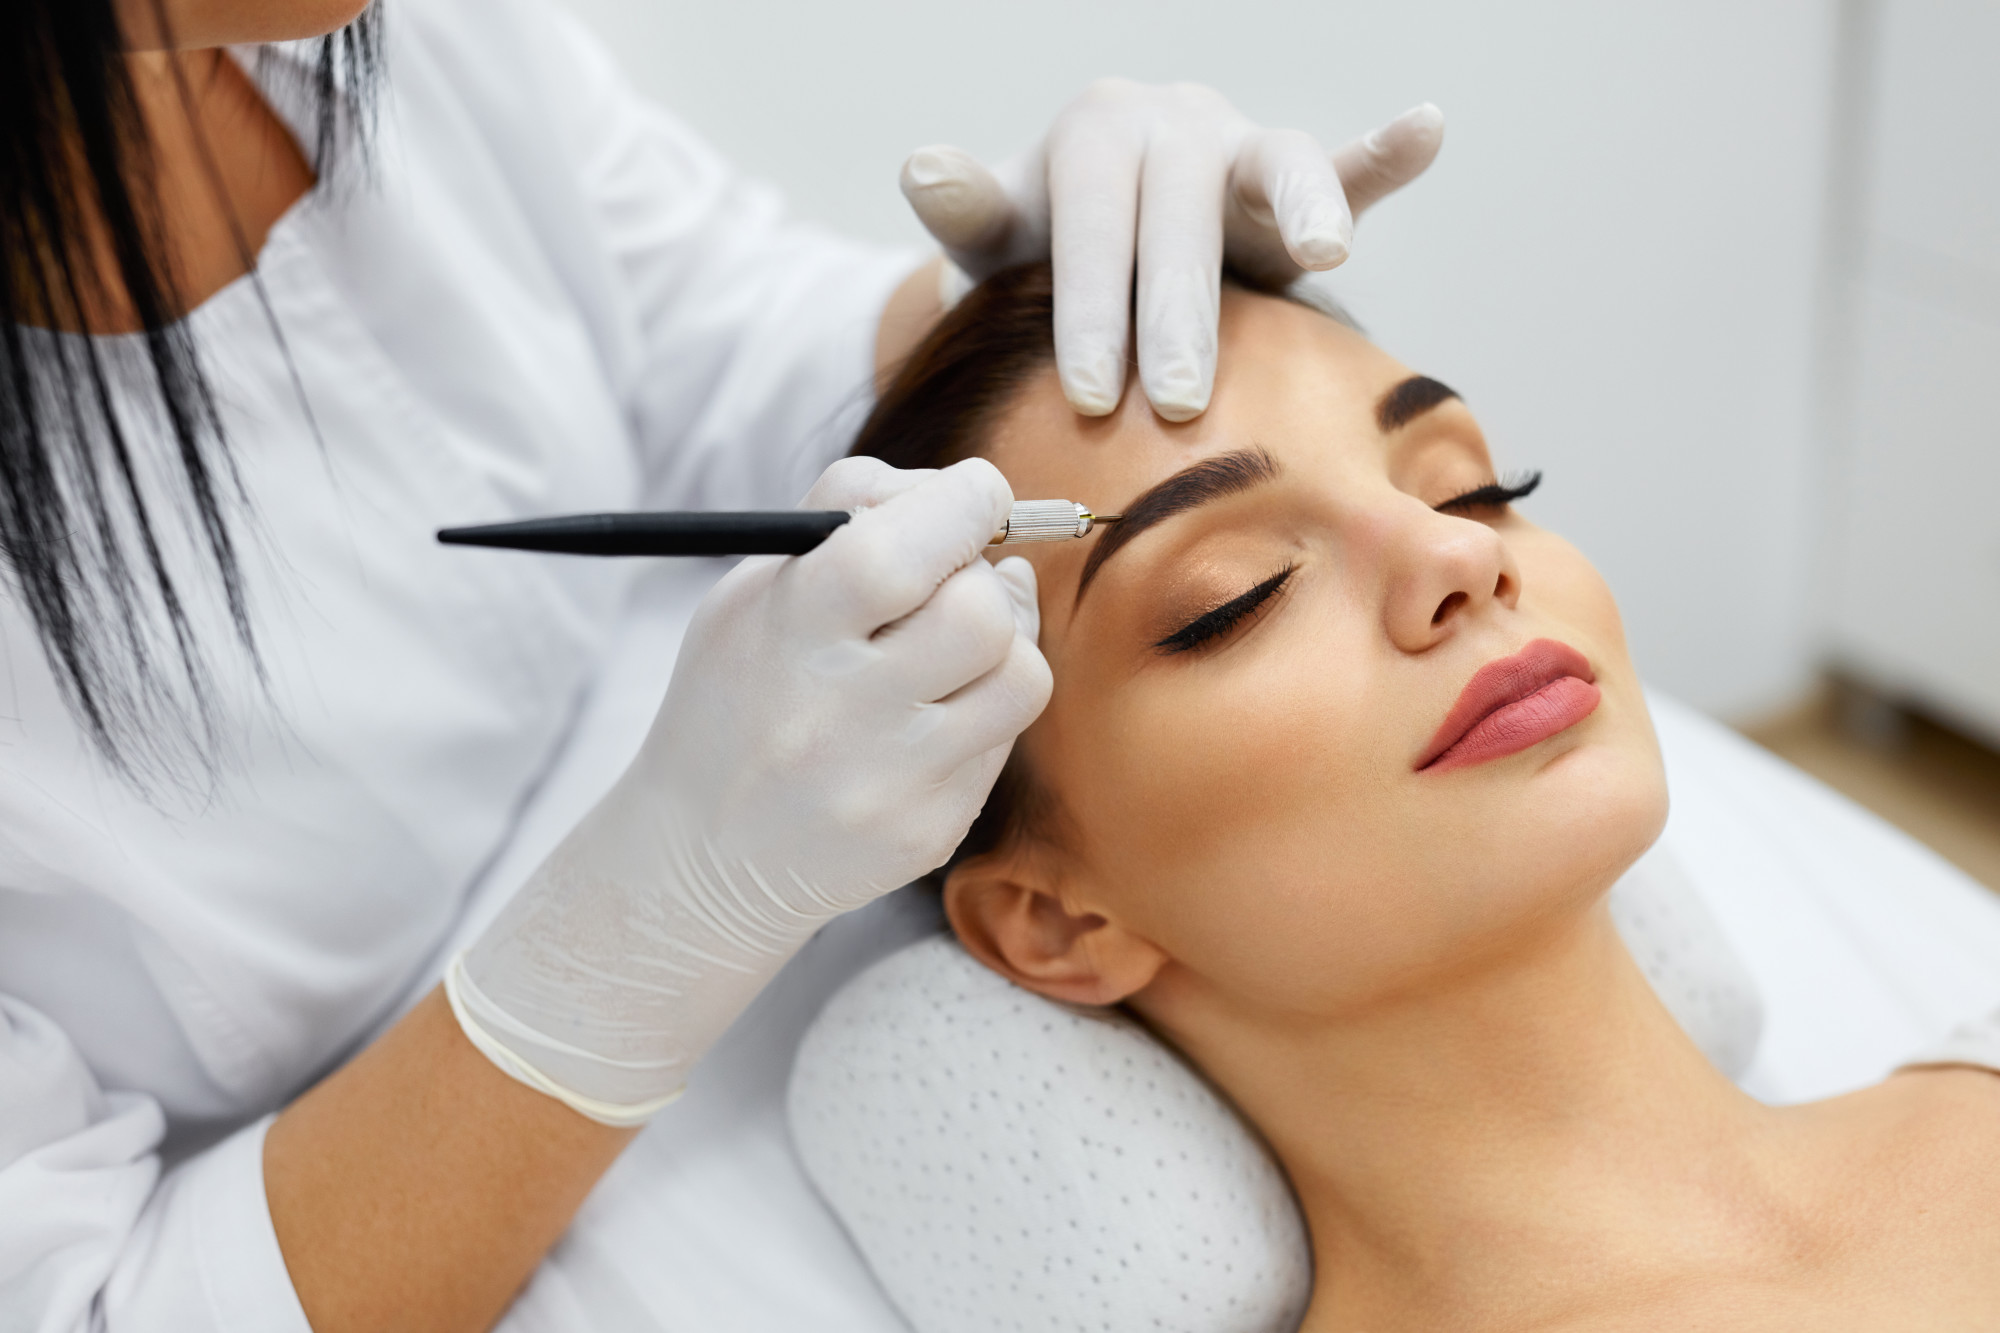 Top 7 Benefits of Eyebrow Tattooing - DFW Microblading of Murrieta and  Temecula Top 7 Benefits of Eyebrow Tattooing